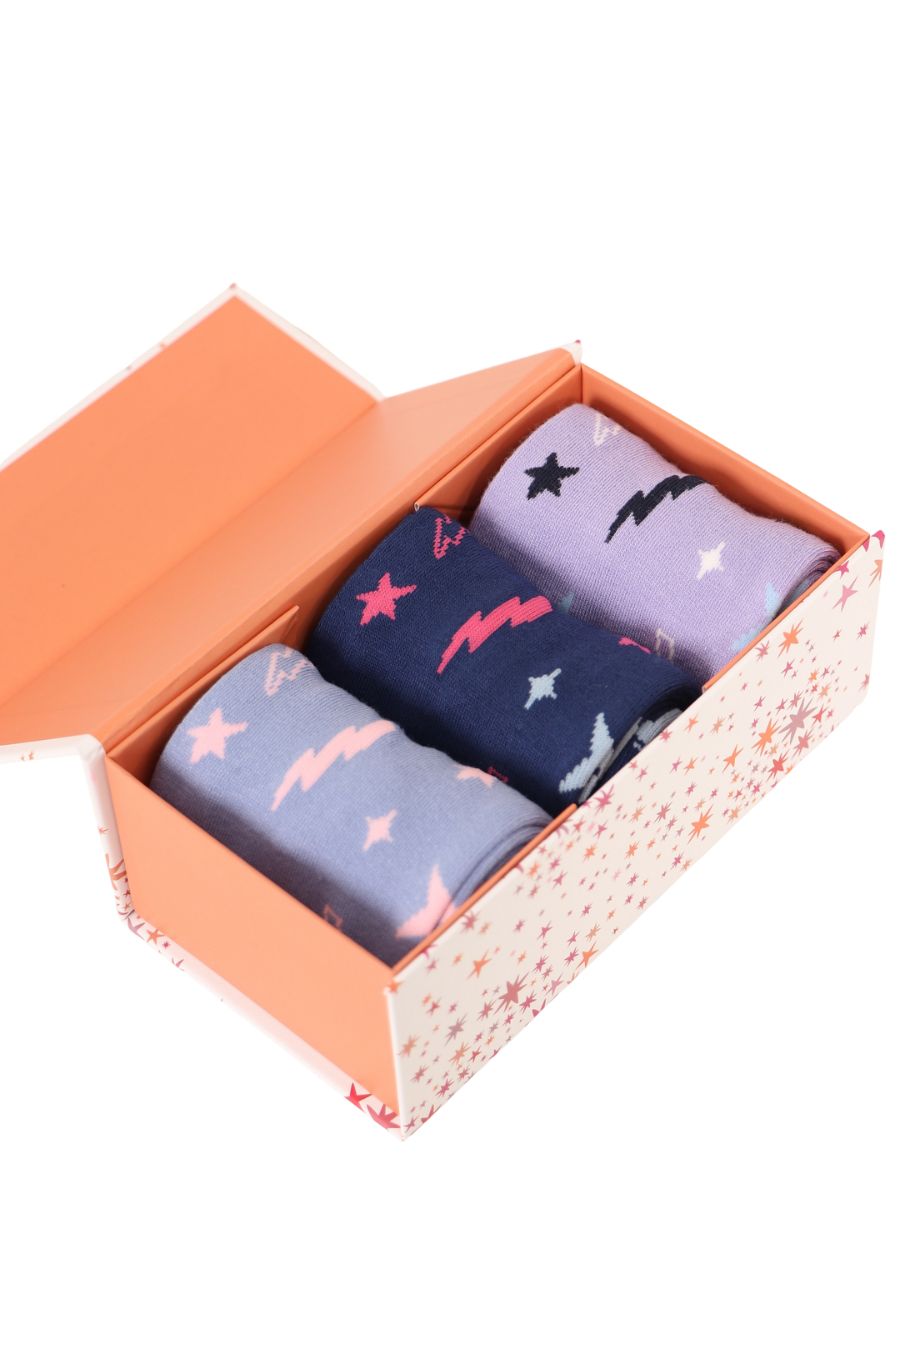 An open gift box showing three star print and lightning bolt print socks, in blue, purple and lilac